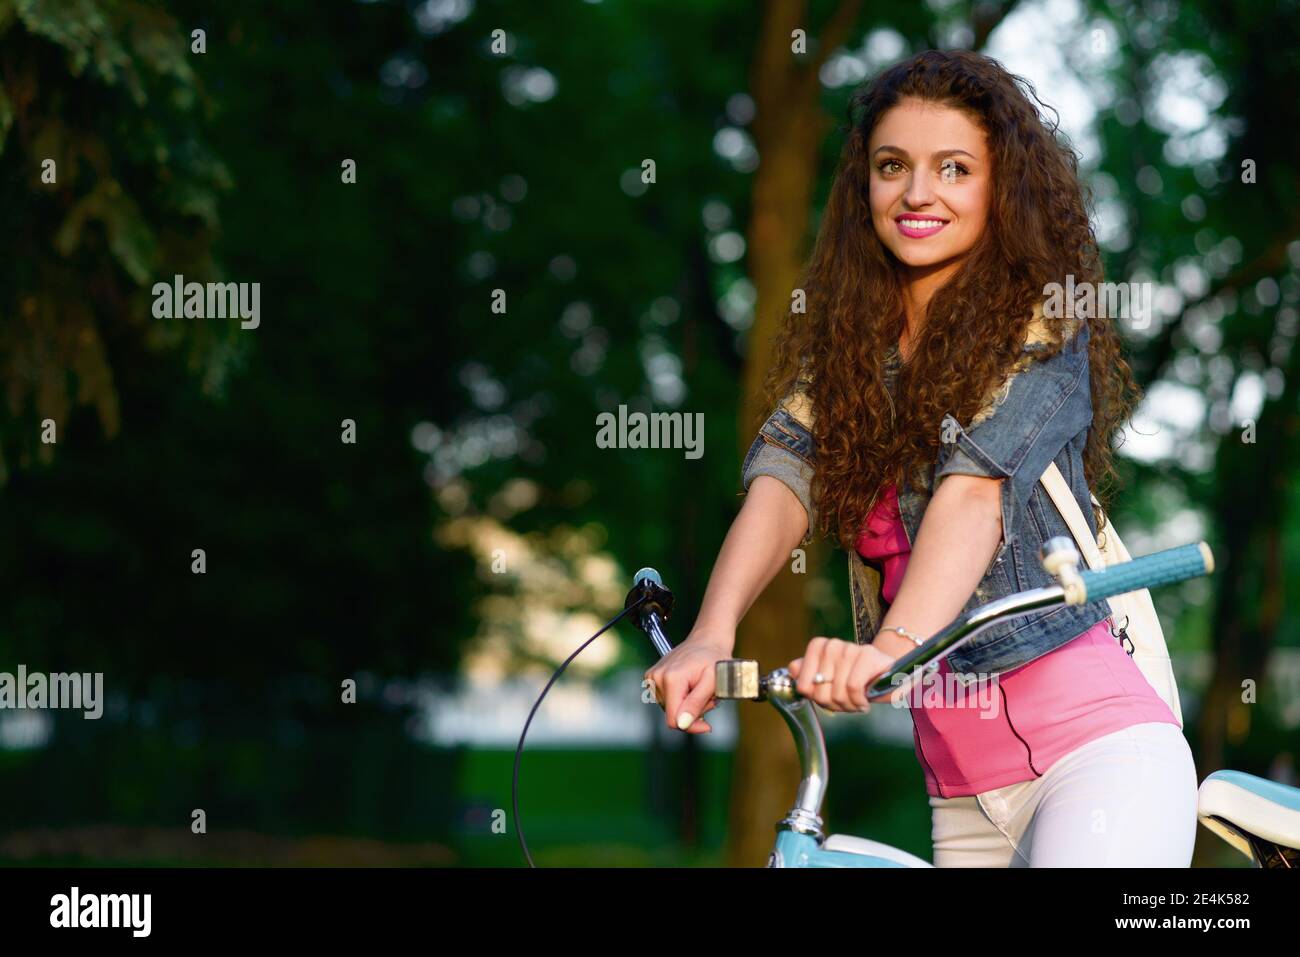 Joyful young woman on a bicycle in the green park at sunset Stock Photo